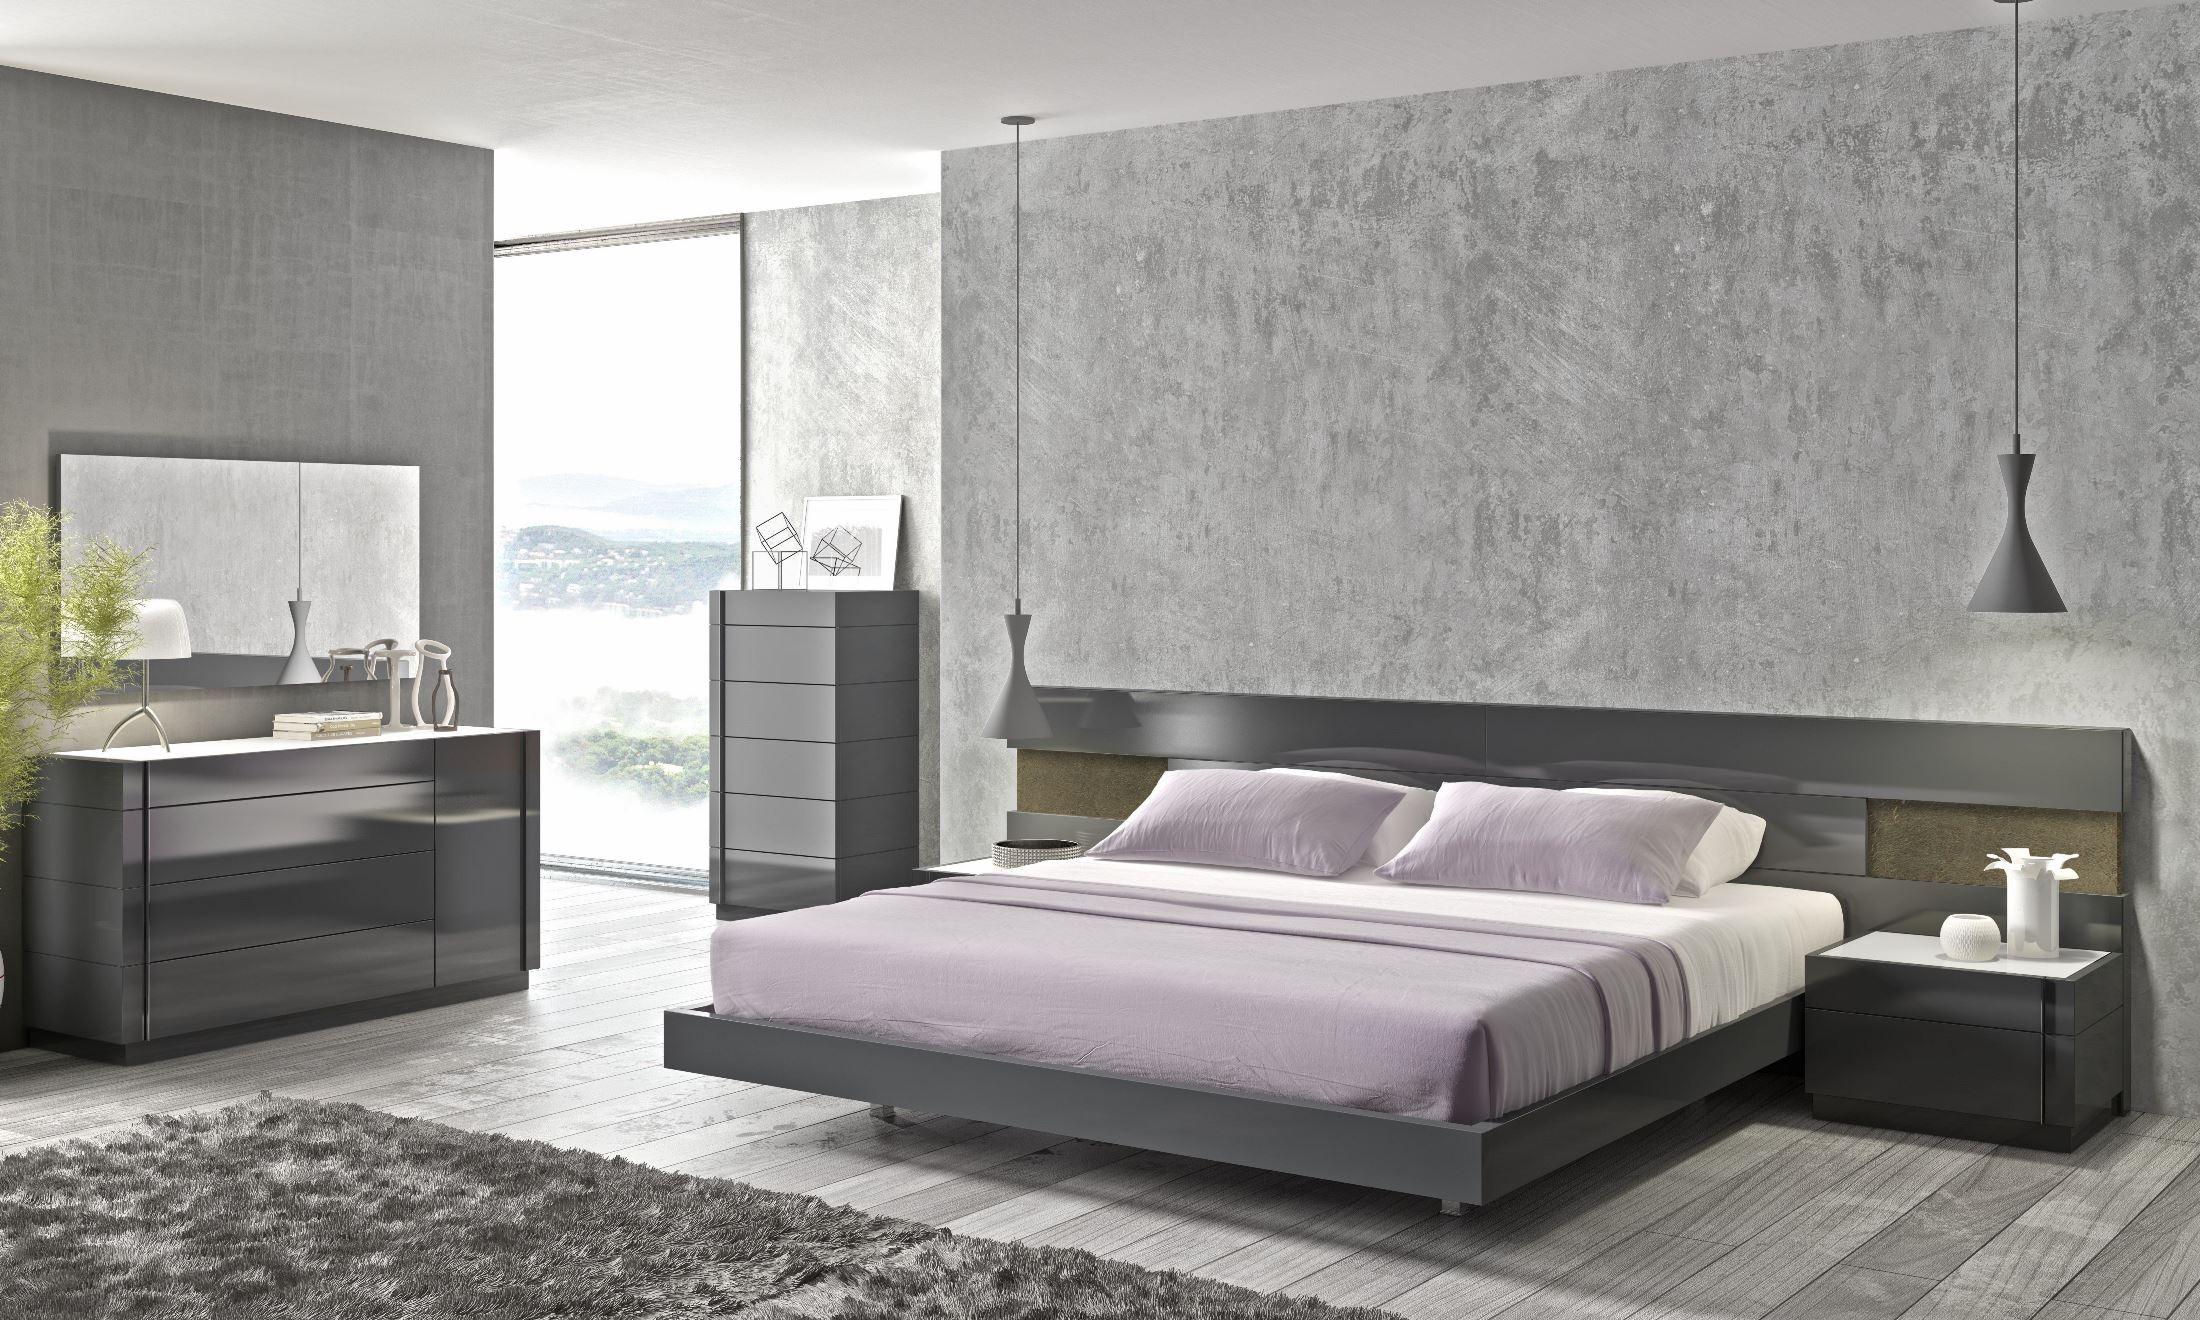 

    
Glossy Grey Lacquer Boyertown Platform QUEEN Bedroom Set 4Pcs Ultra Contemporary
